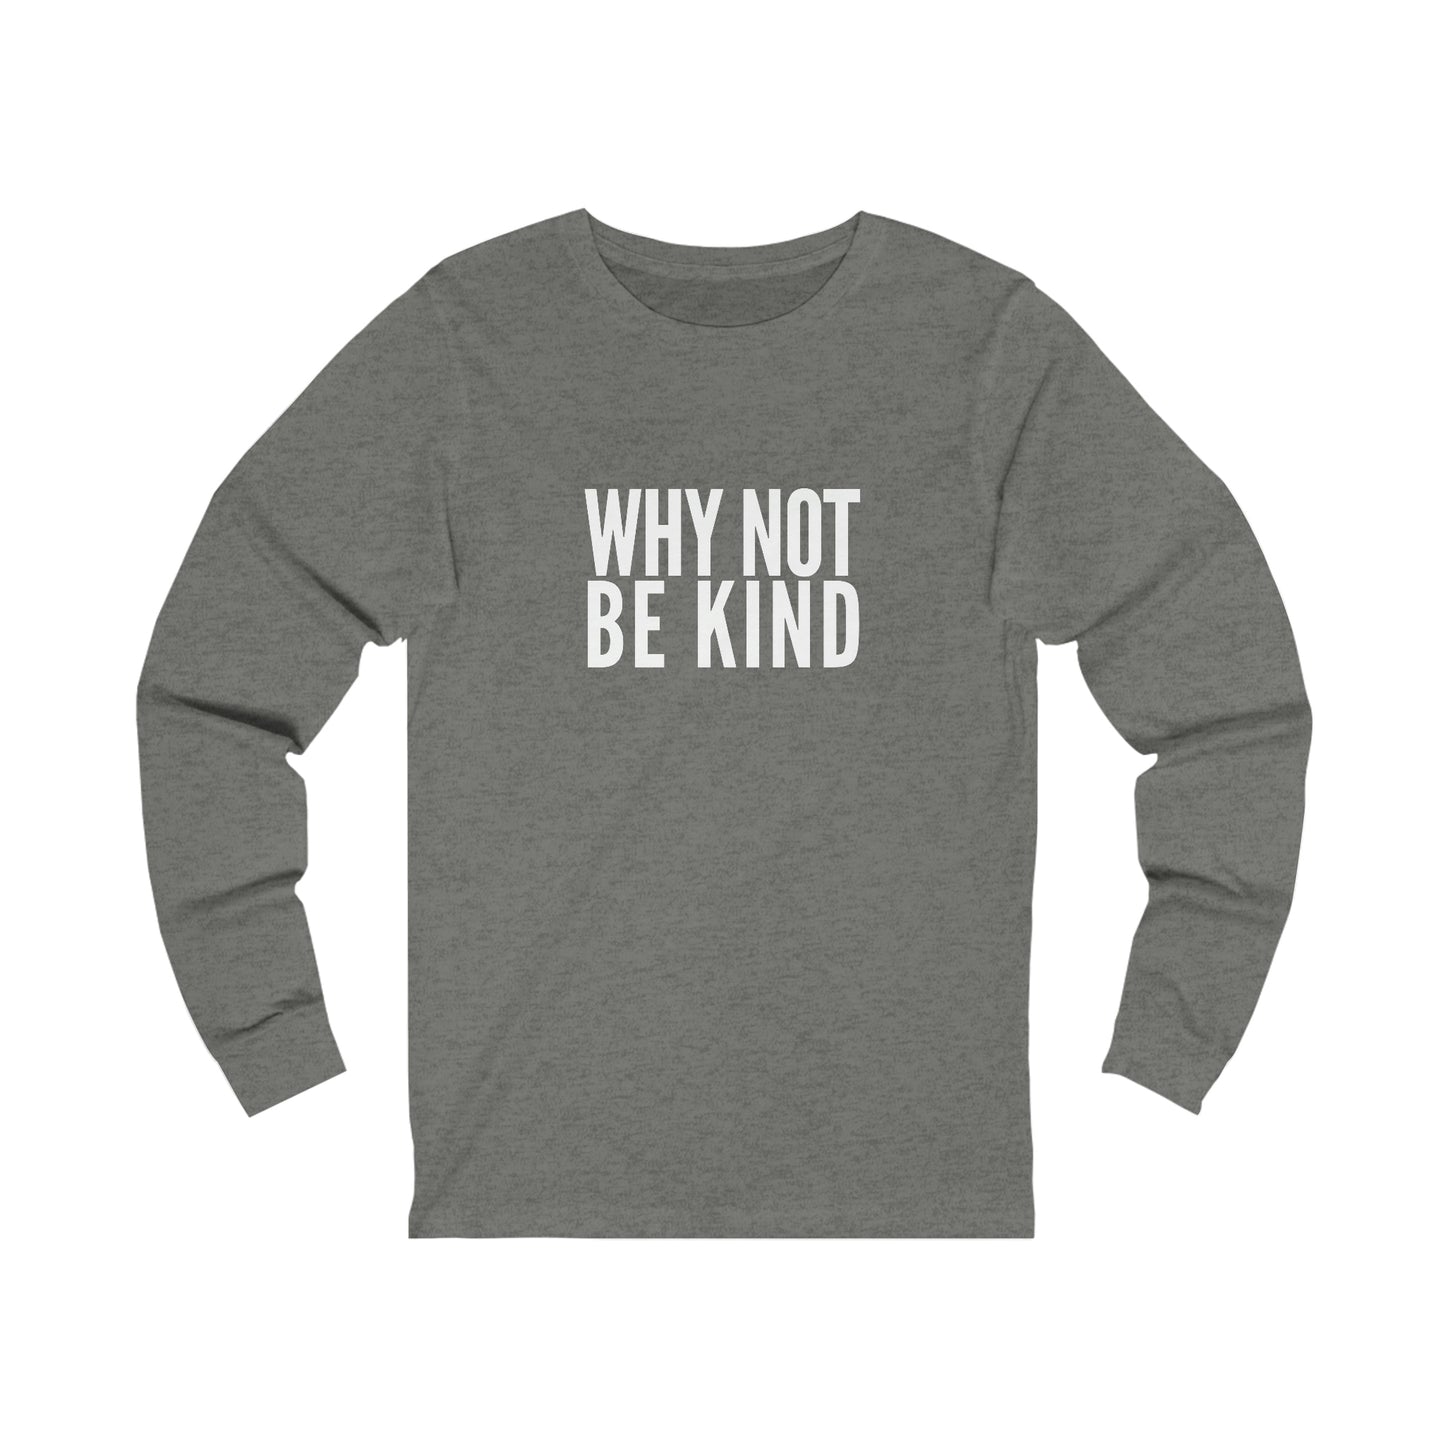 Why Not Be Kind Unisex Jersey Long Sleeve Tee